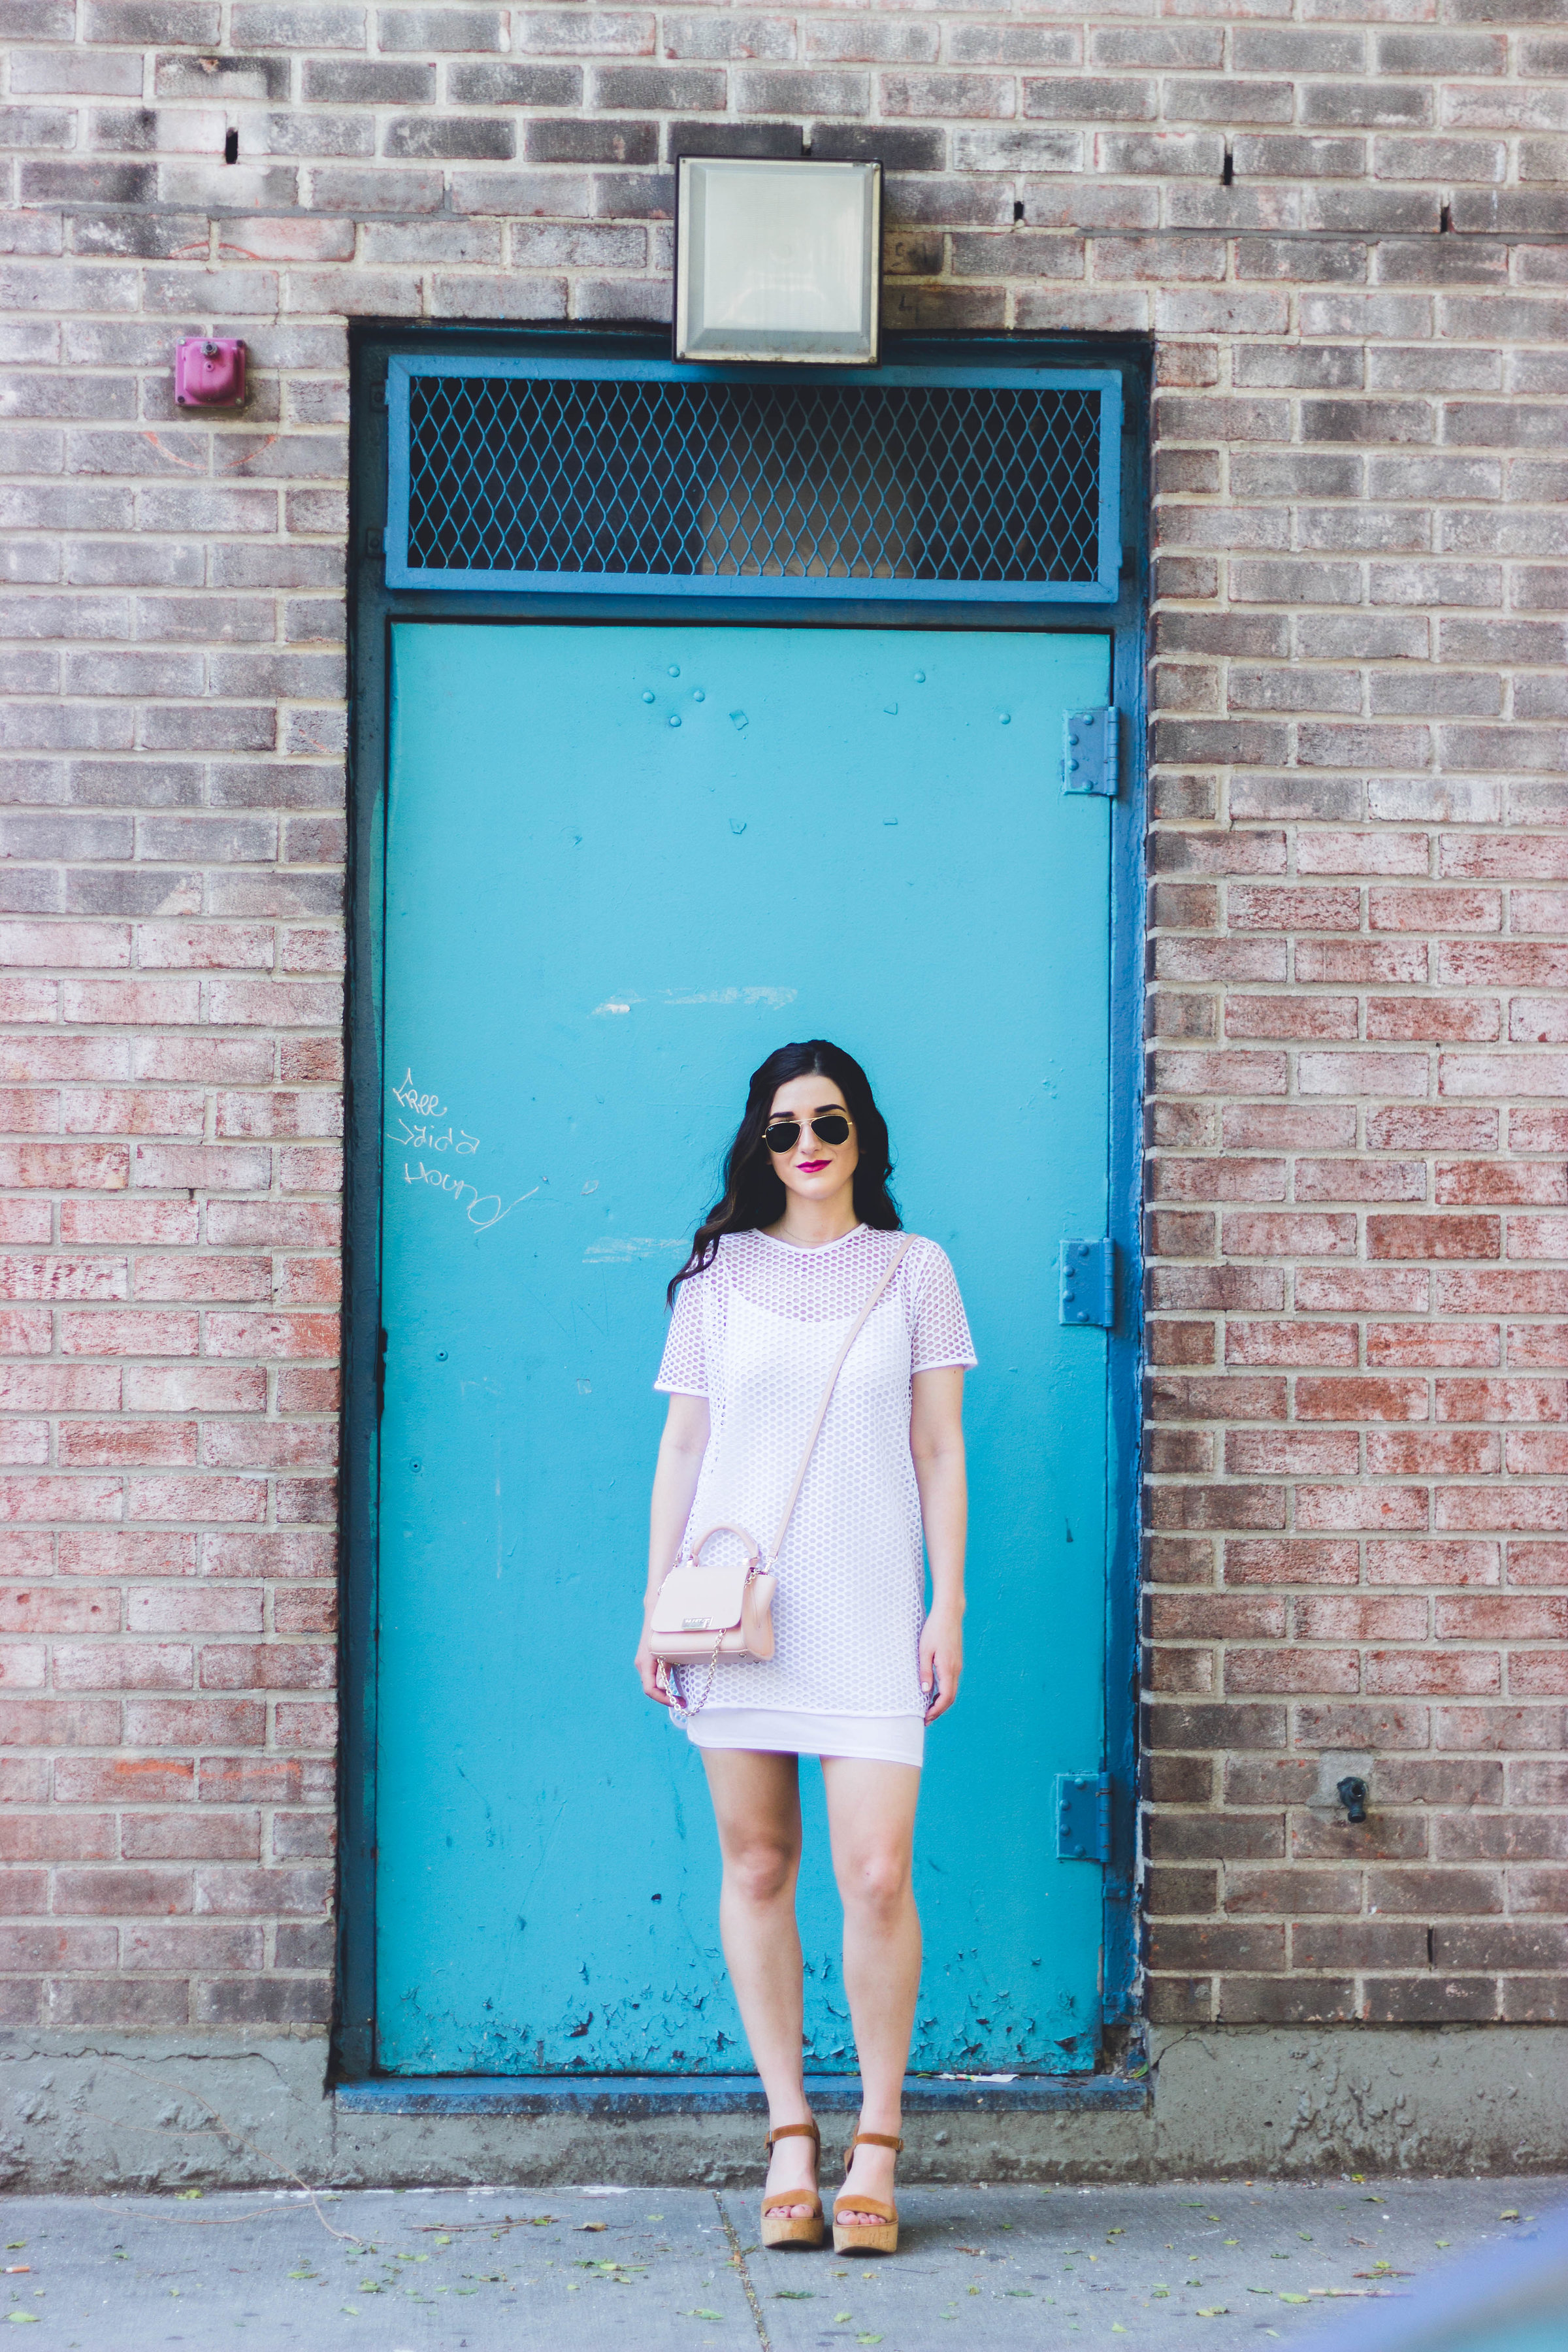 White Mesh Dress Love My Fiance Hate Being Engaged Esther Santer Fashion Blog NYC Street Style Blogger Outfit OOTD Trendy Summer Cork Wedges ASOS Dolce Vita Aviators Sunglasses RayBan Girl Women Look  Inspiration Hair Beauty Model Photoshoot New York.jpg